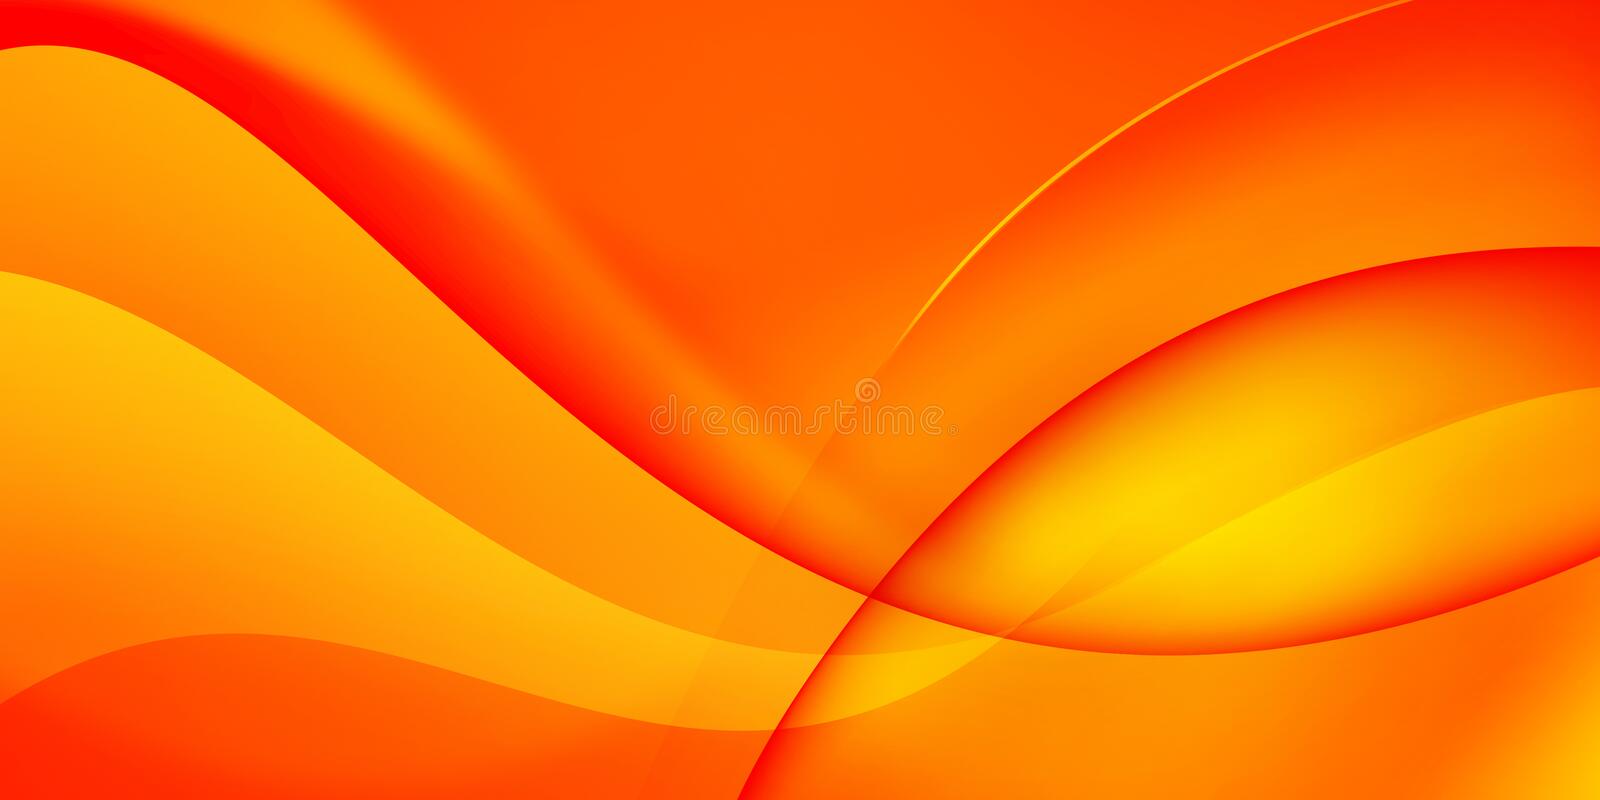 Red and orange bination creating yellow gradient random shapes abstract background wallpaper concept stock illustration